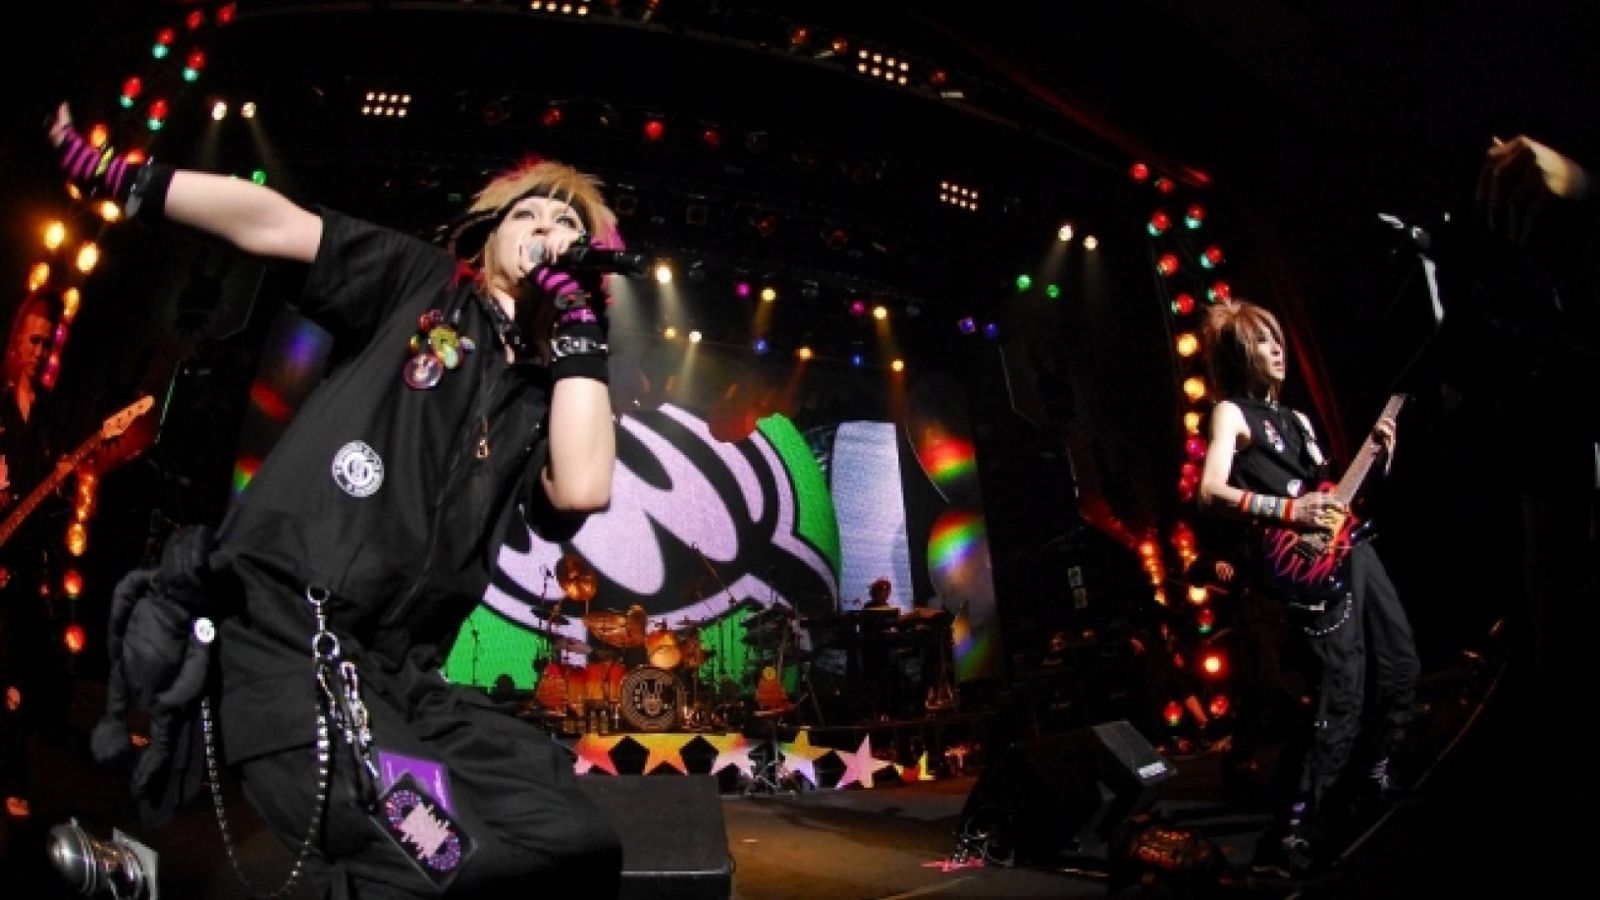 LM.C - ~☆Rock the PARTY☆'08~, Japani 19.8.2008 © PONY CANYON INC.